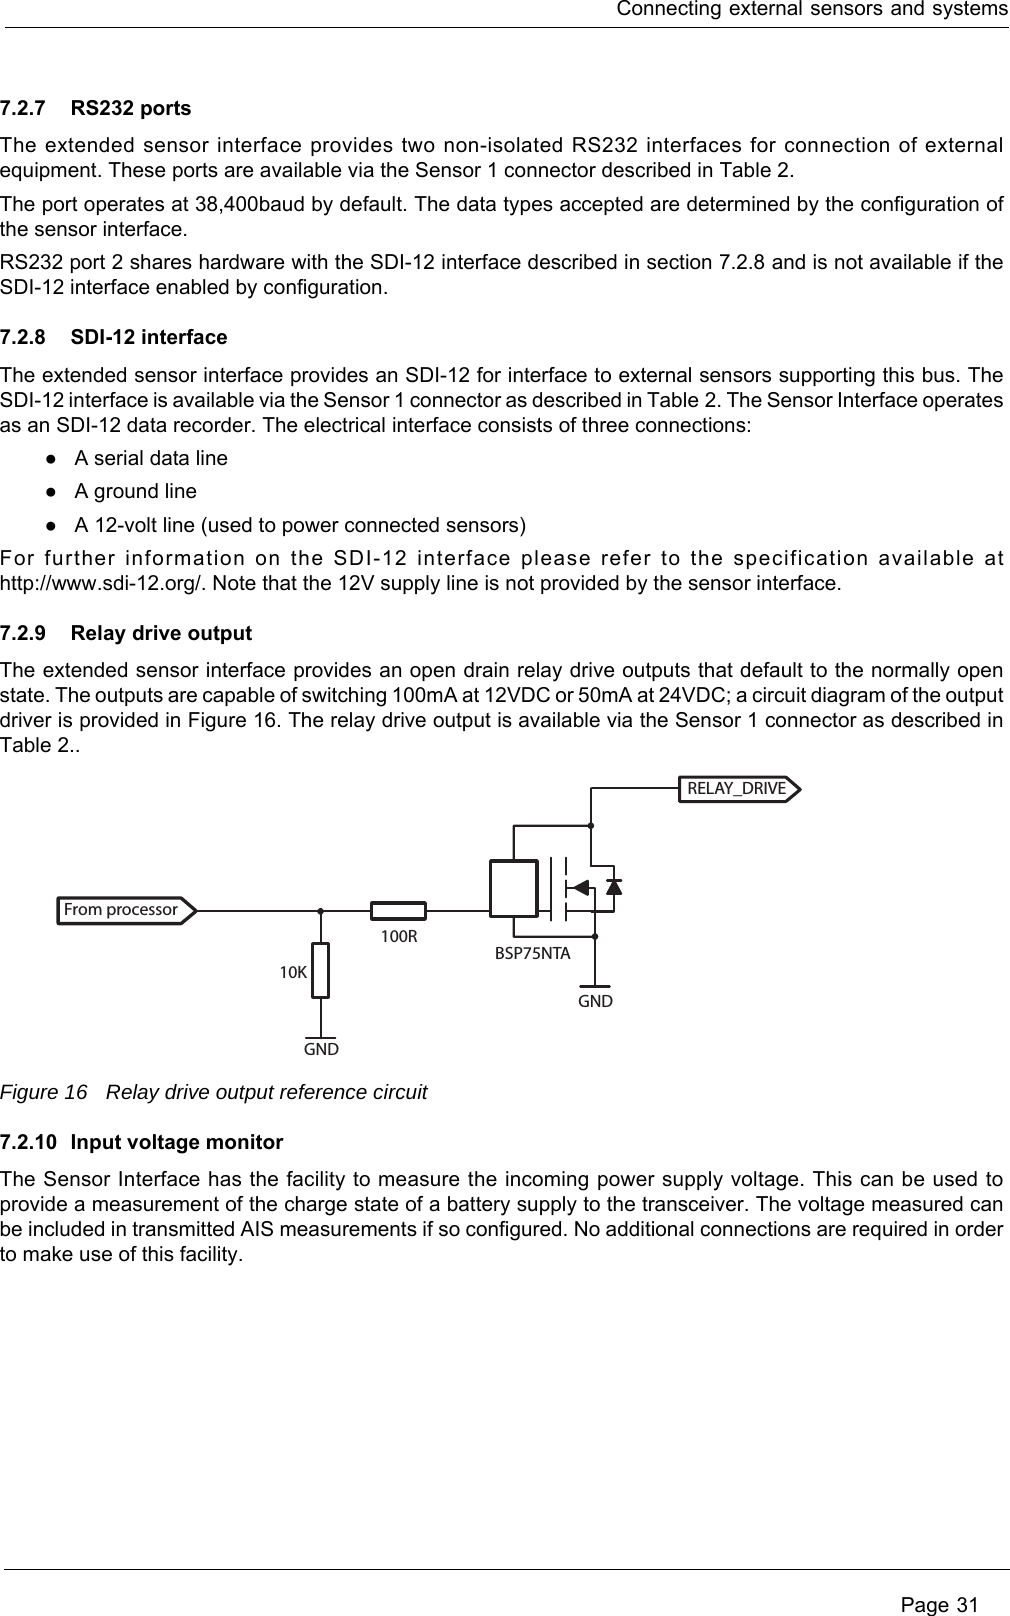 Connecting external sensors and systems Page 317.2.7 RS232 portsThe extended sensor interface provides two non-isolated RS232 interfaces for connection of external equipment. These ports are available via the Sensor 1 connector described in Table 2. The port operates at 38,400baud by default. The data types accepted are determined by the configuration of the sensor interface. RS232 port 2 shares hardware with the SDI-12 interface described in section 7.2.8 and is not available if the SDI-12 interface enabled by configuration.7.2.8 SDI-12 interfaceThe extended sensor interface provides an SDI-12 for interface to external sensors supporting this bus. The SDI-12 interface is available via the Sensor 1 connector as described in Table 2. The Sensor Interface operates as an SDI-12 data recorder. The electrical interface consists of three connections:●A serial data line●A ground line●A 12-volt line (used to power connected sensors)For further information on the SDI-12 interface please refer to the specification available at http://www.sdi-12.org/. Note that the 12V supply line is not provided by the sensor interface.7.2.9 Relay drive outputThe extended sensor interface provides an open drain relay drive outputs that default to the normally open state. The outputs are capable of switching 100mA at 12VDC or 50mA at 24VDC; a circuit diagram of the output driver is provided in Figure 16. The relay drive output is available via the Sensor 1 connector as described in Table 2..Figure 16 Relay drive output reference circuit7.2.10 Input voltage monitorThe Sensor Interface has the facility to measure the incoming power supply voltage. This can be used to provide a measurement of the charge state of a battery supply to the transceiver. The voltage measured can be included in transmitted AIS measurements if so configured. No additional connections are required in order to make use of this facility.From processorRELAY_DRIVE10K100RGNDGNDBSP75NTA